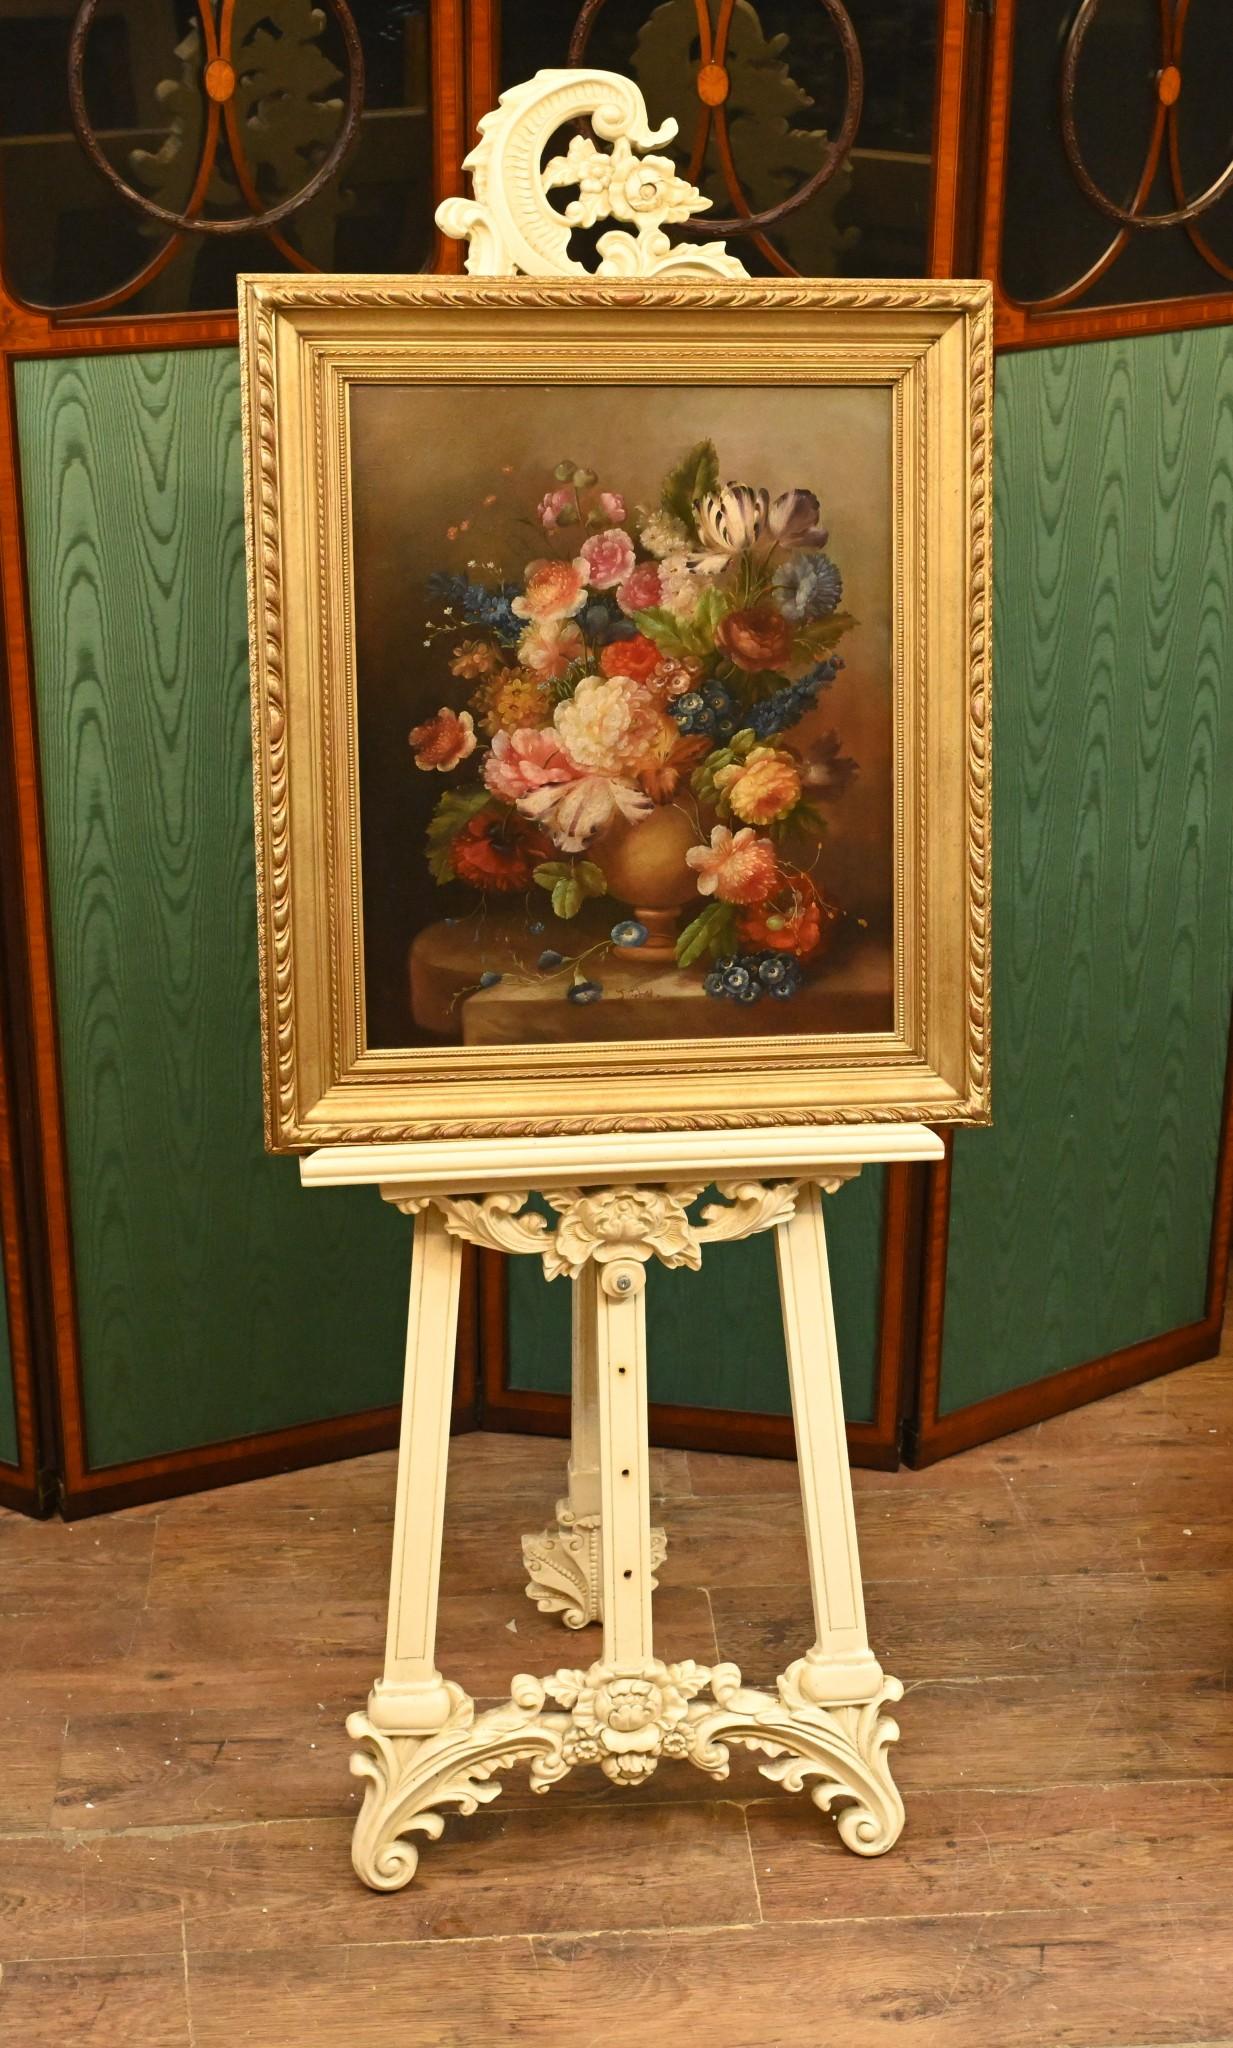 Gorgeous hand painted still life oil painting in the Georgian manner
Very vivid and bright, will add light and energy to any room
Comes in elegant gilt frame
Offered in great shape ready for home use right away
We ship to every corner of the planet